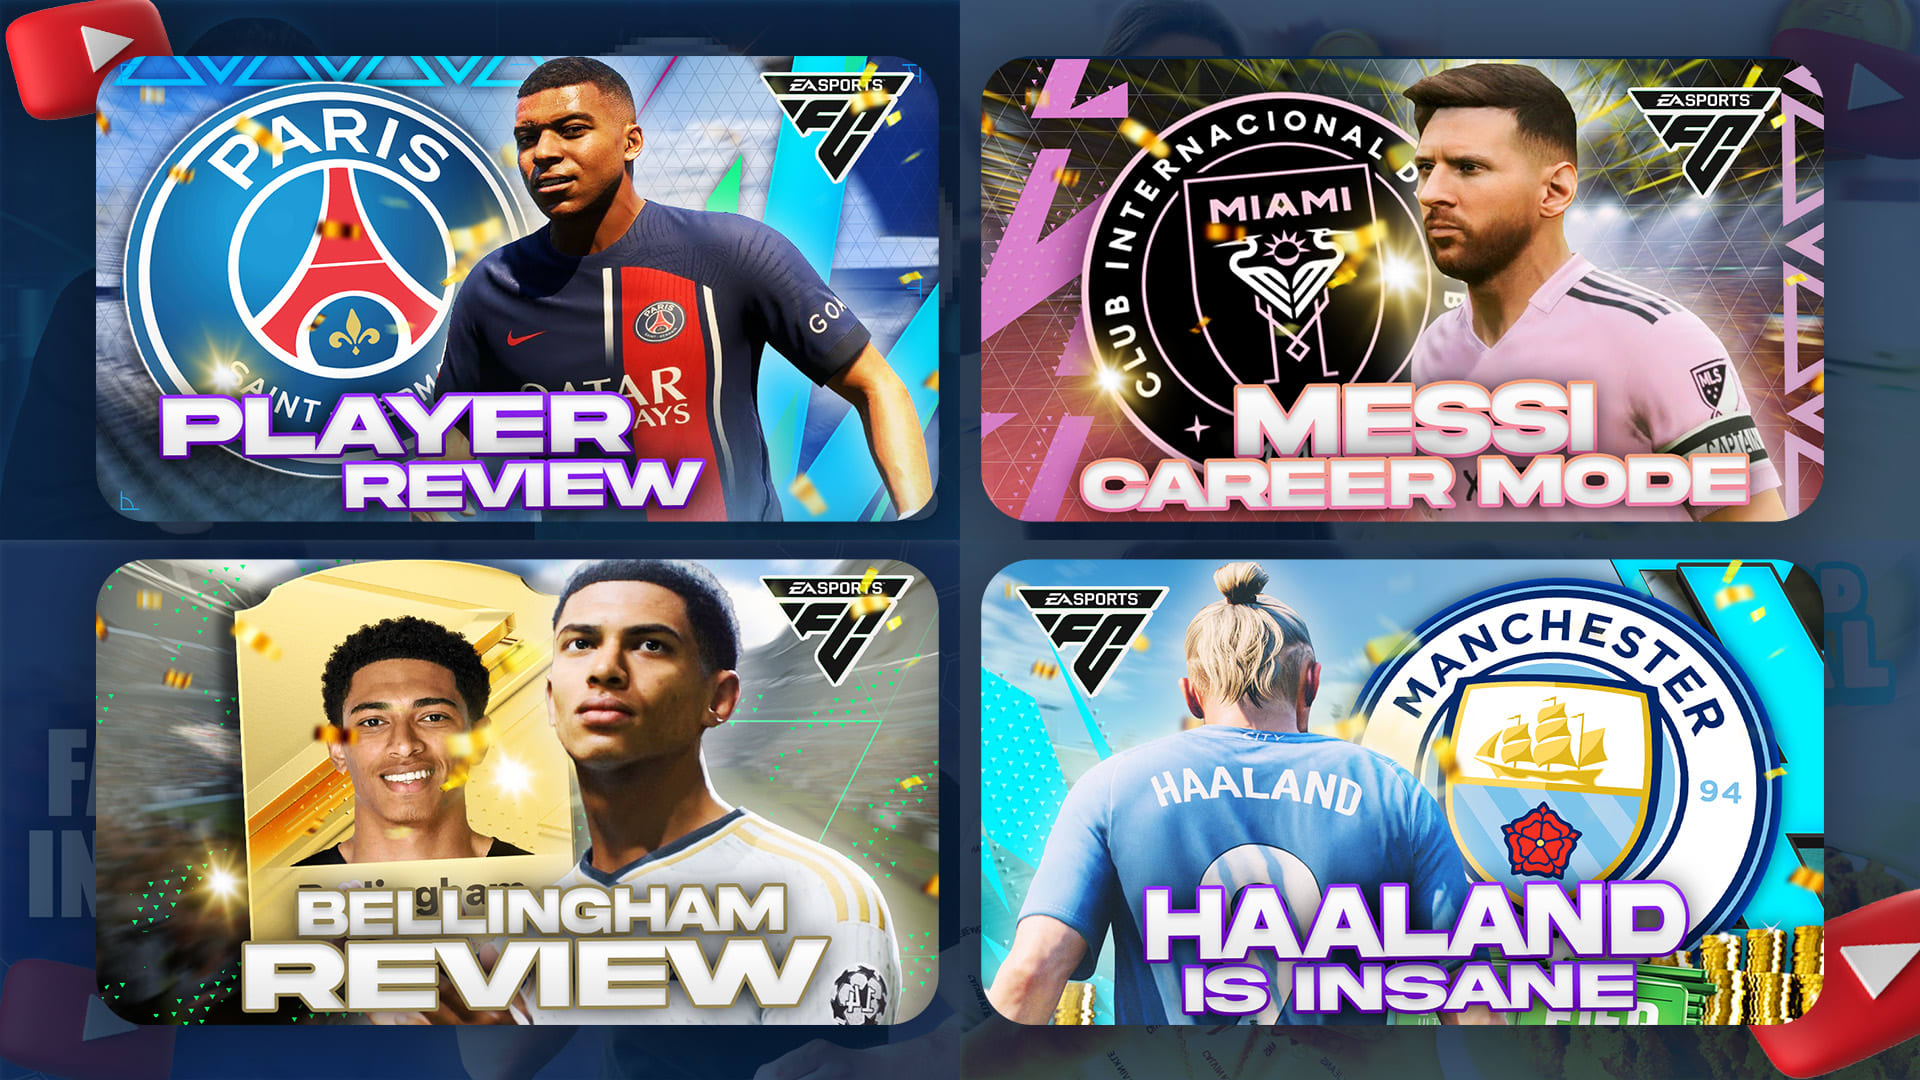 FIFA MOBILE 22 OFFICIAL GAMEPLAY & TRAILER! EVERY FIFA MOBILE 22 EXPLAINED! FIFA  MOBILE 22 TRAILER! 